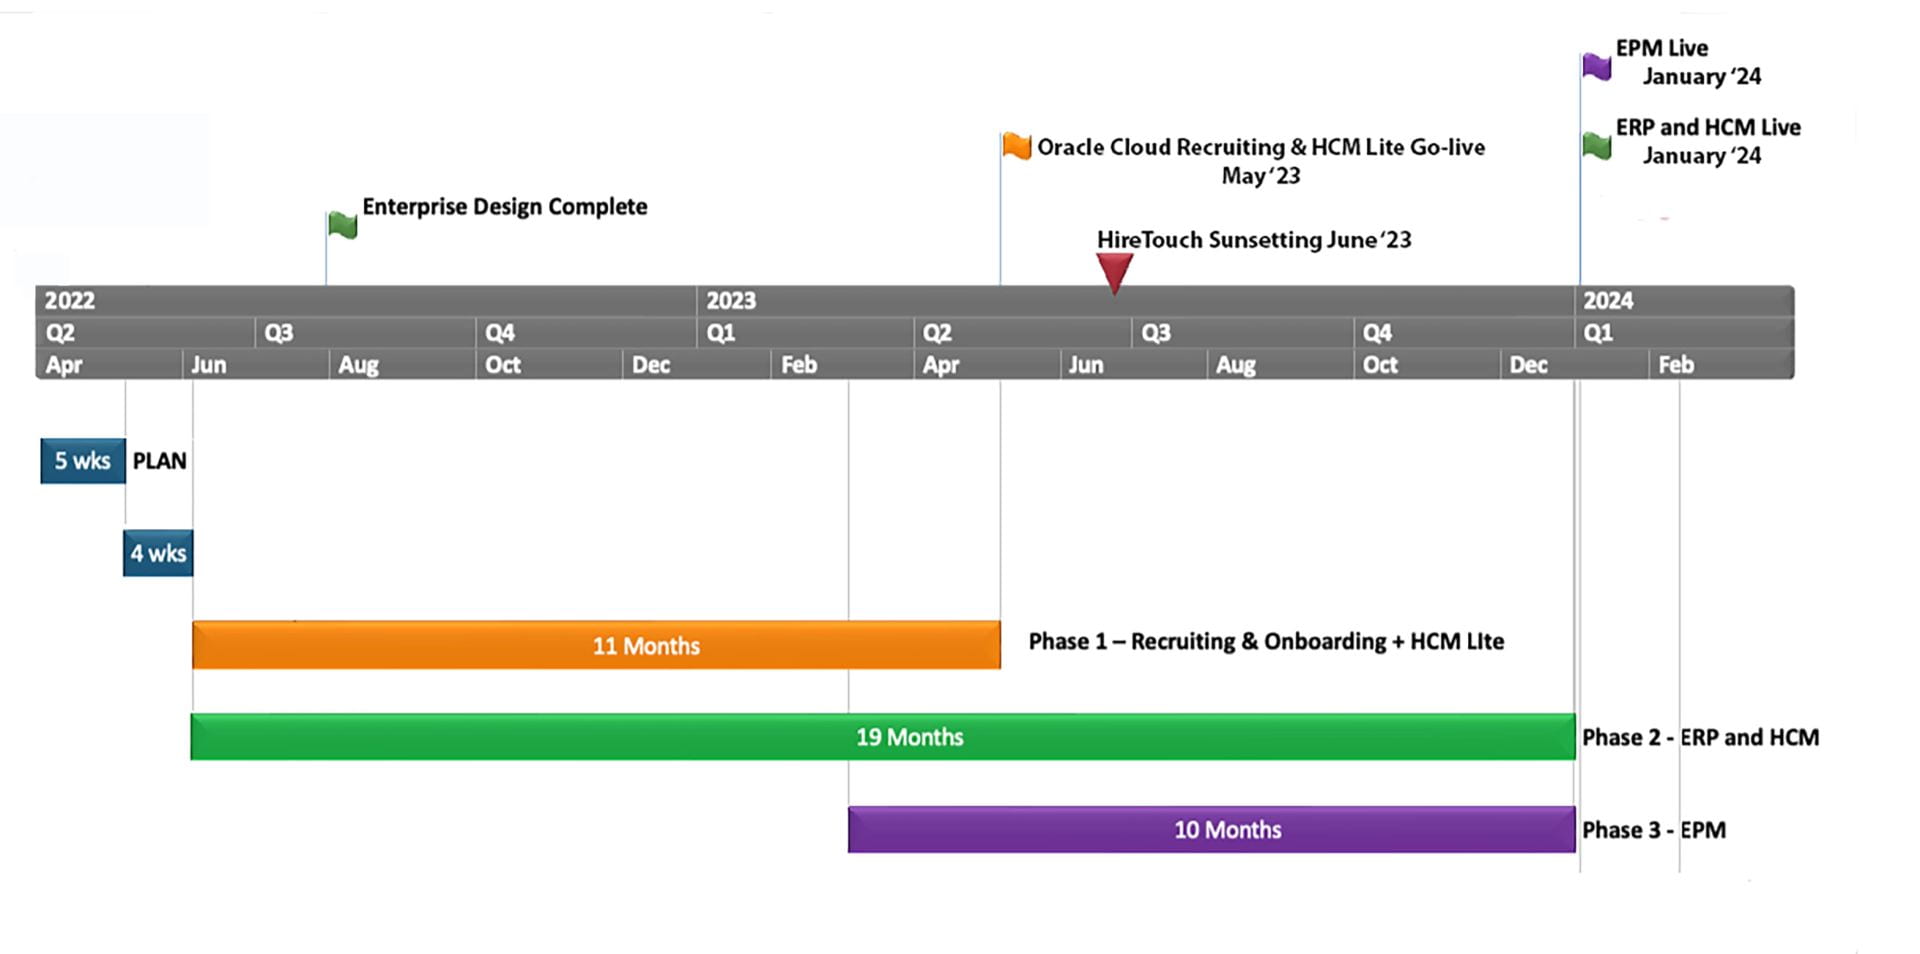 Image of timeline running from 4/22 through 2/24. 1st phase runs for 11 months starting 6/22; 2nd phase runs 10 months starting 6/22 and 3rd phase runs 10 months starting 3/23.